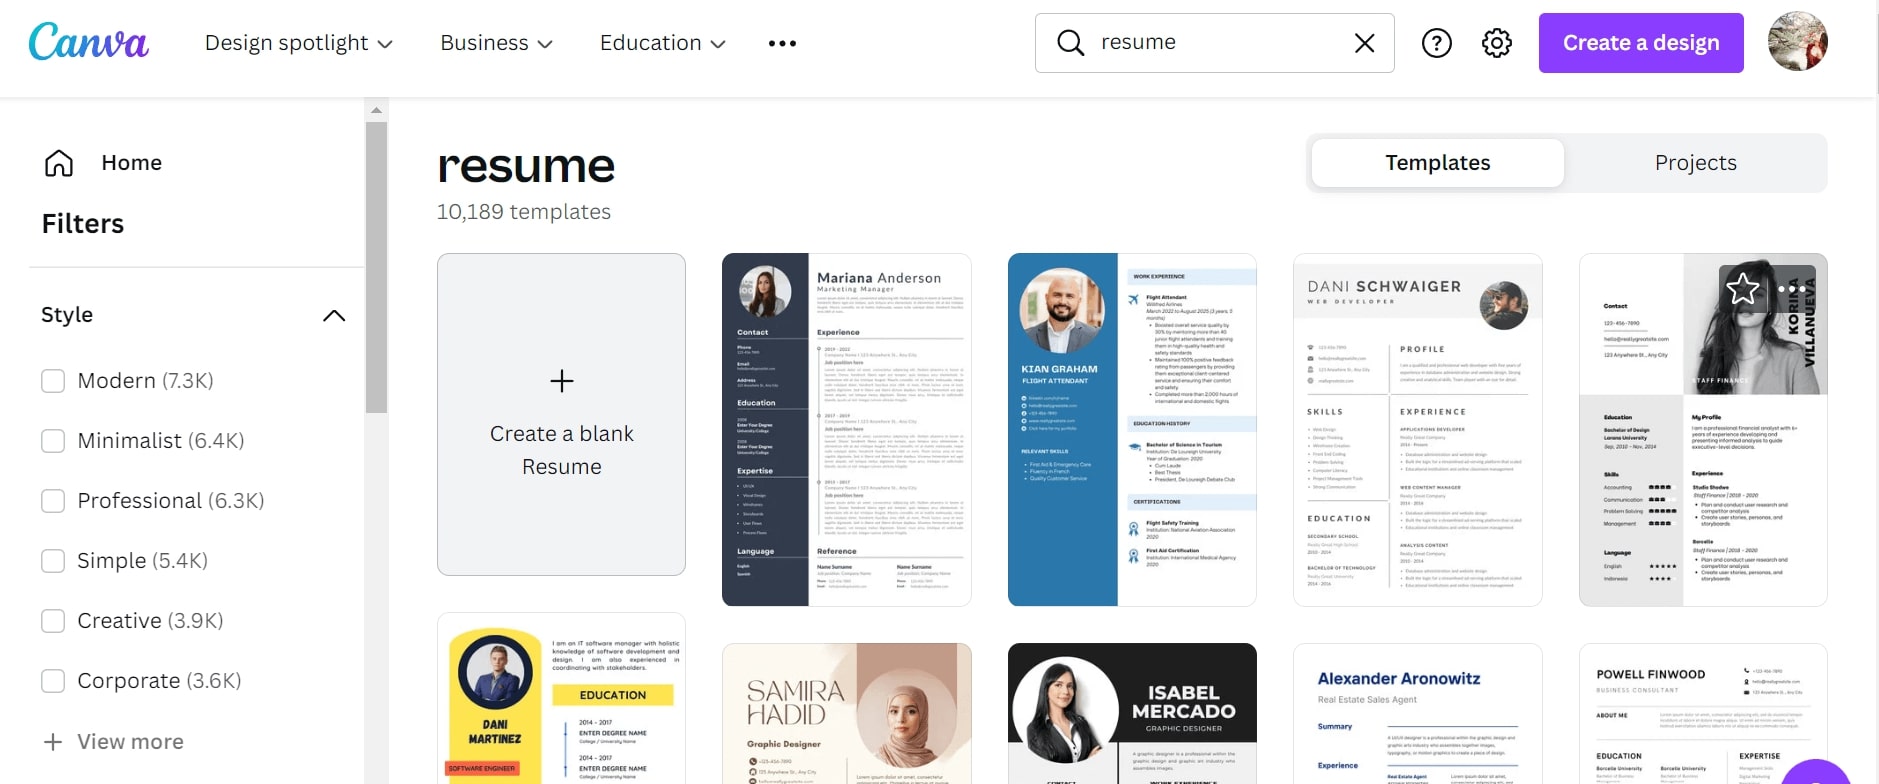 Make your resume stand out for your job interview on Canva